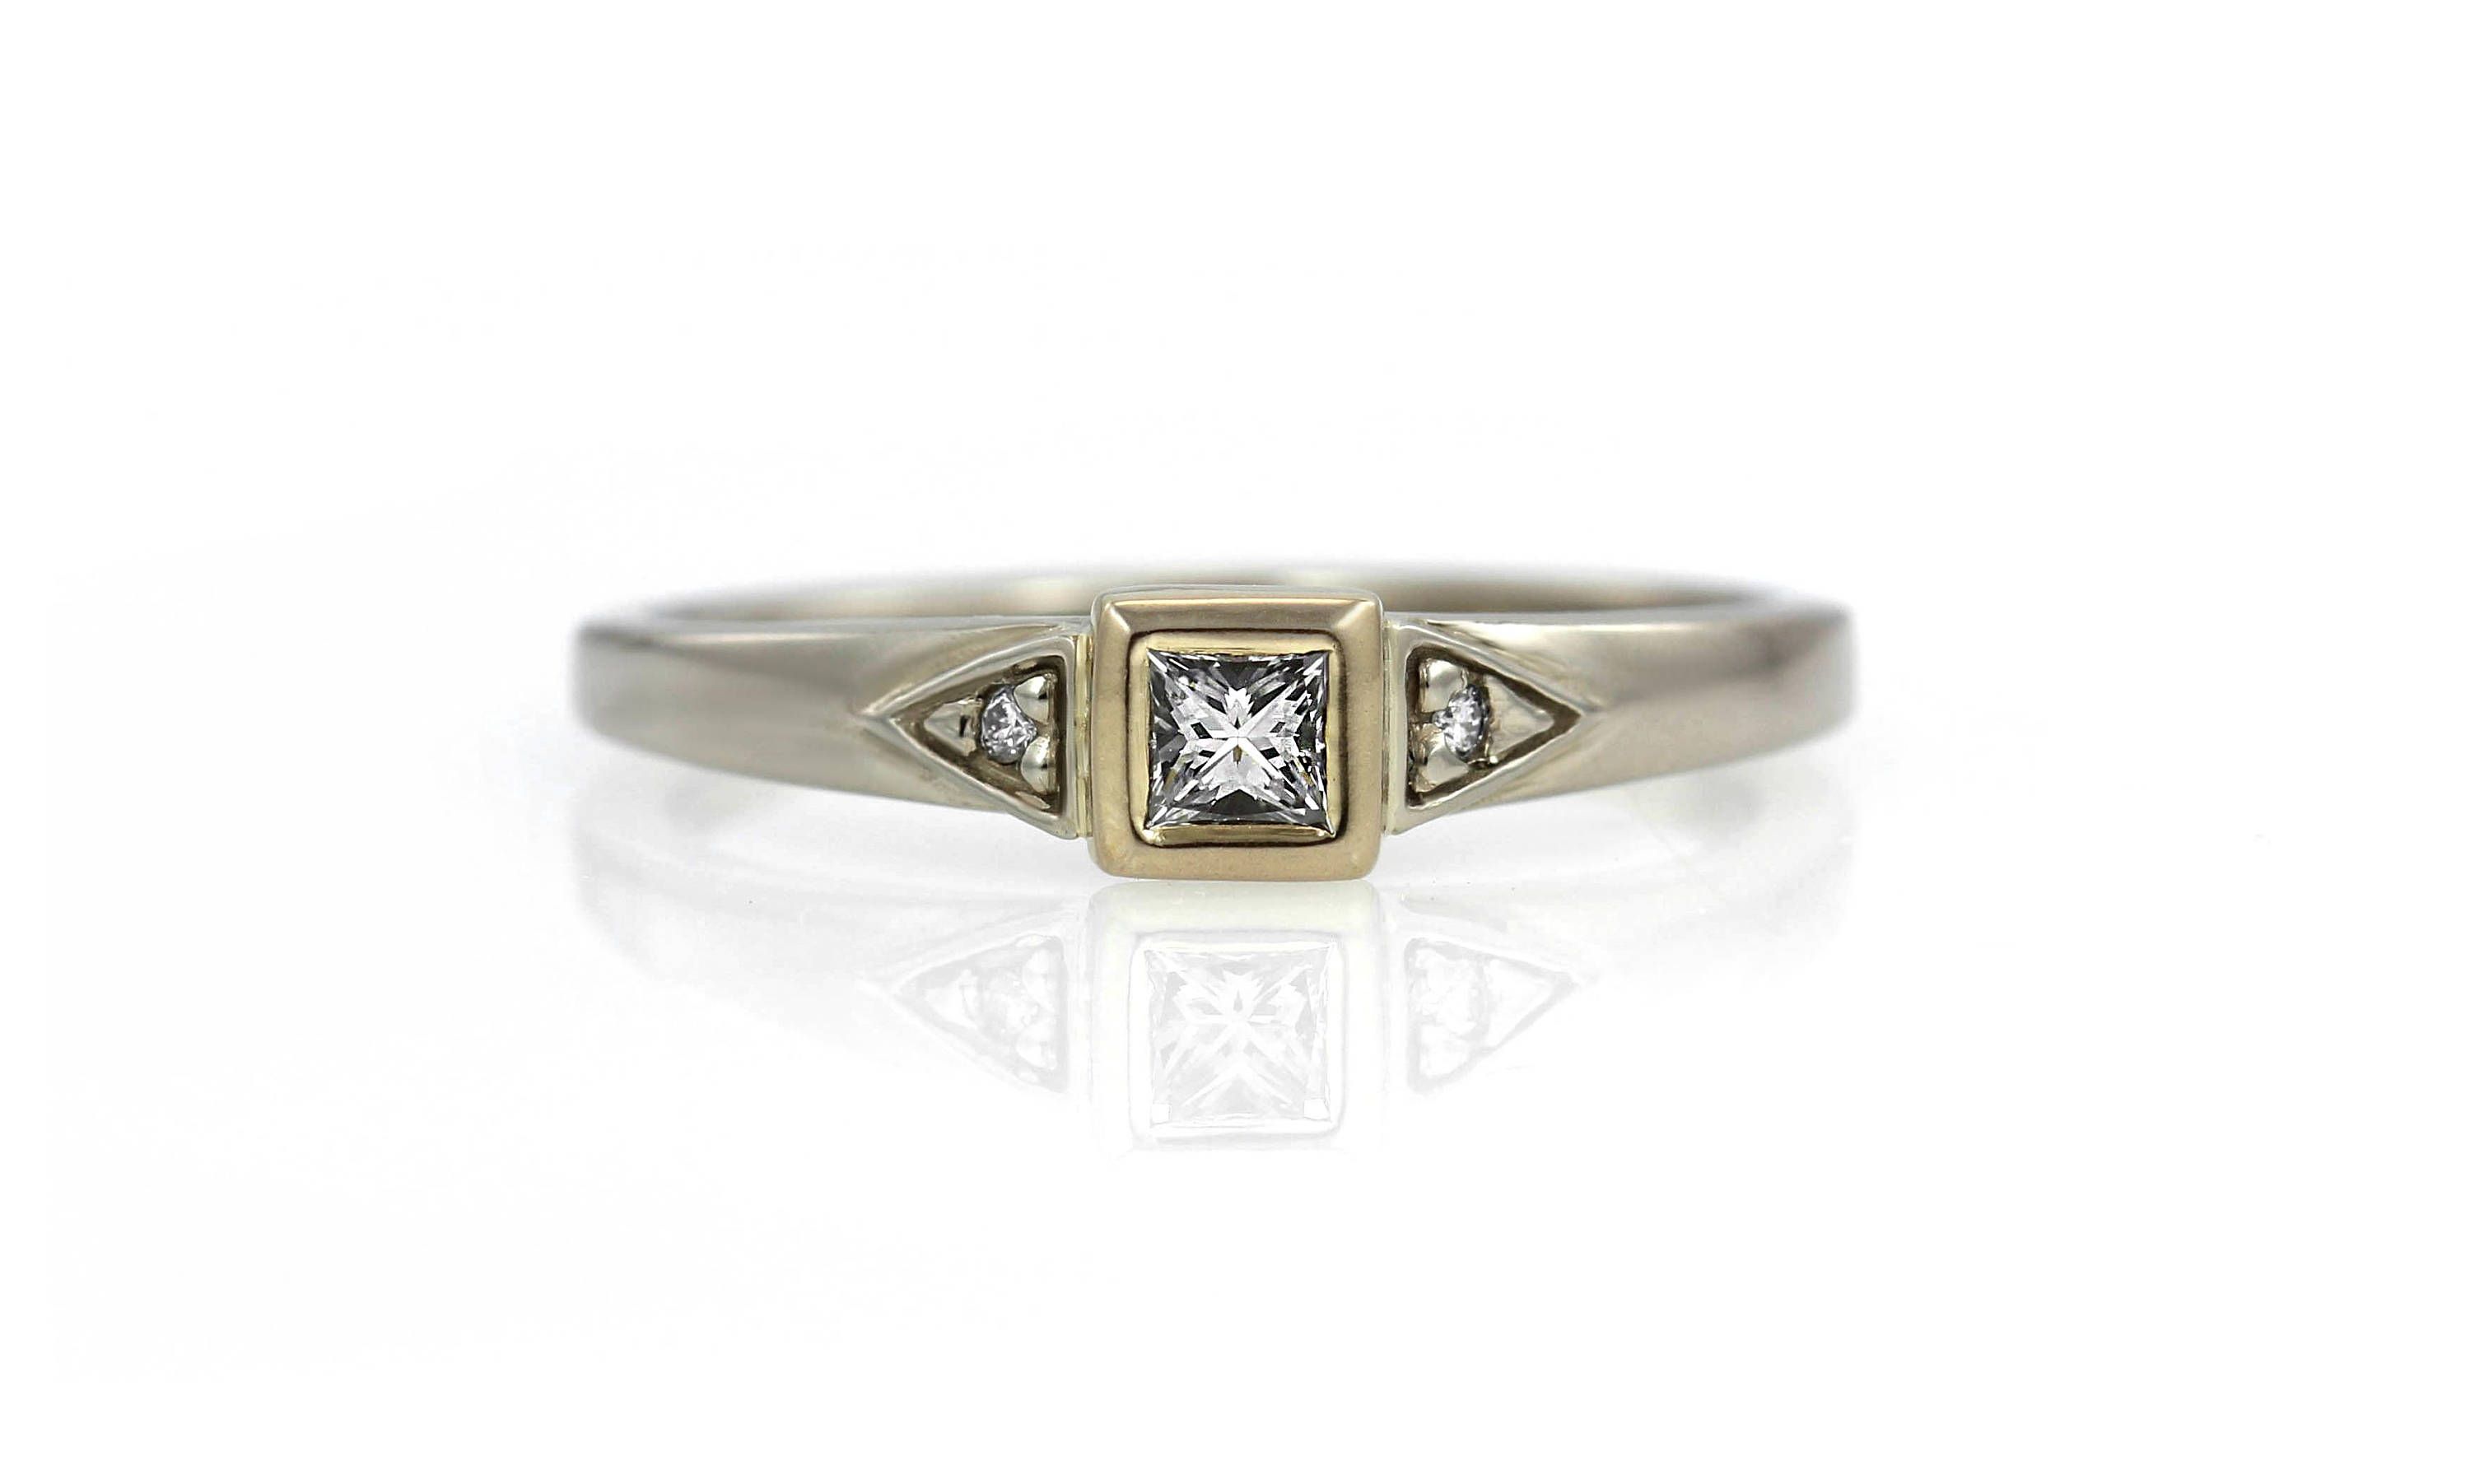 Square Diamond Engagement Ring 14k White Gold & Yellow Gold With Triangle  Accents – Two Tone Recycled Metal – Wedding Ring, Anniversary Gift Within 2020 Diamond Multi Triangle Anniversary Rings In White Gold (View 15 of 25)